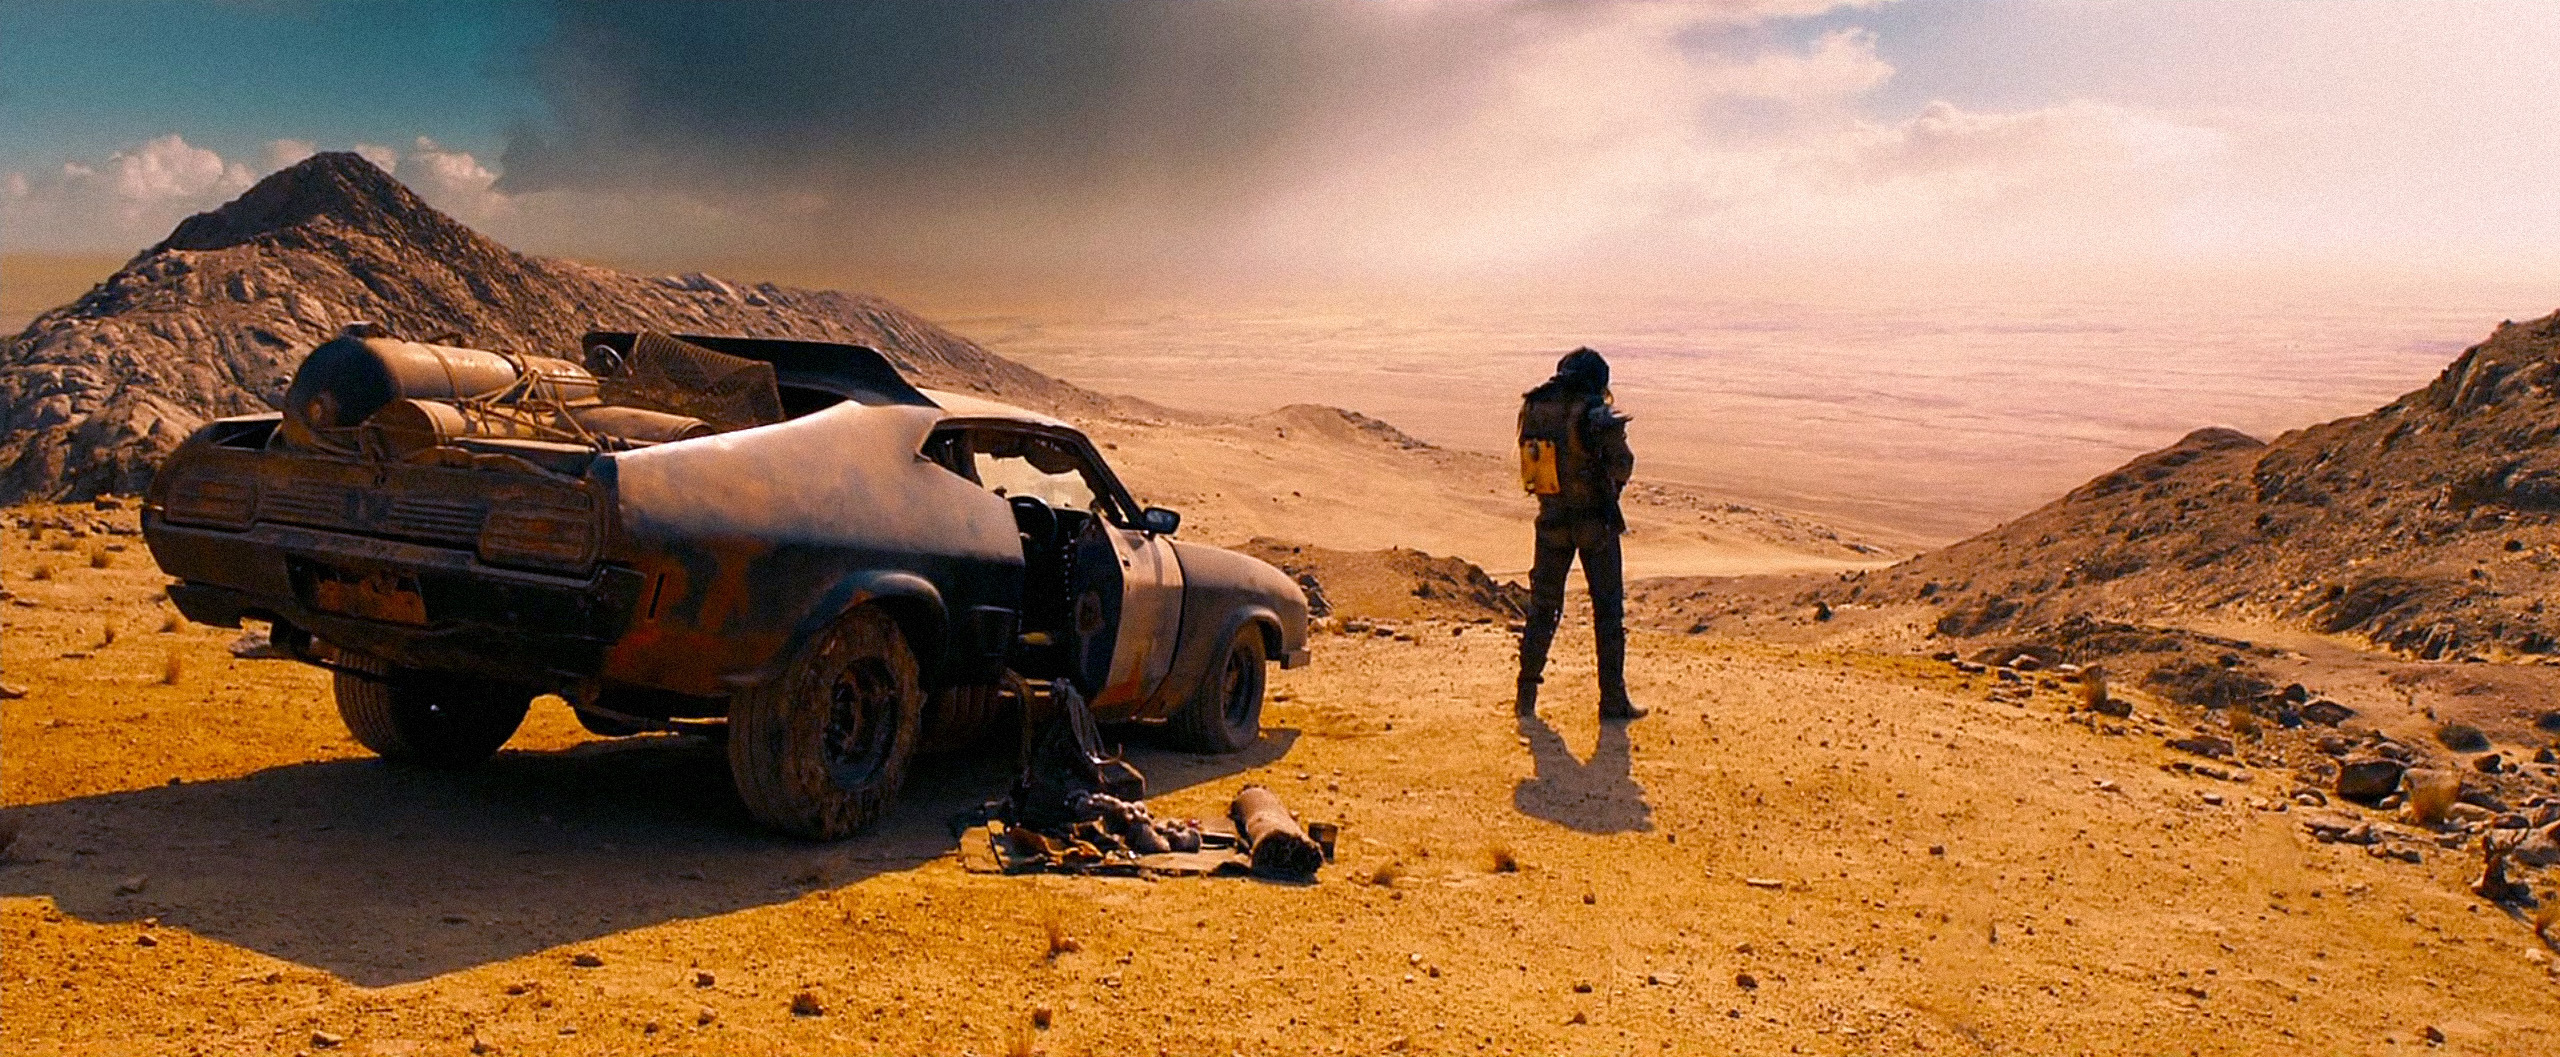 where to watch mad max fury road free online